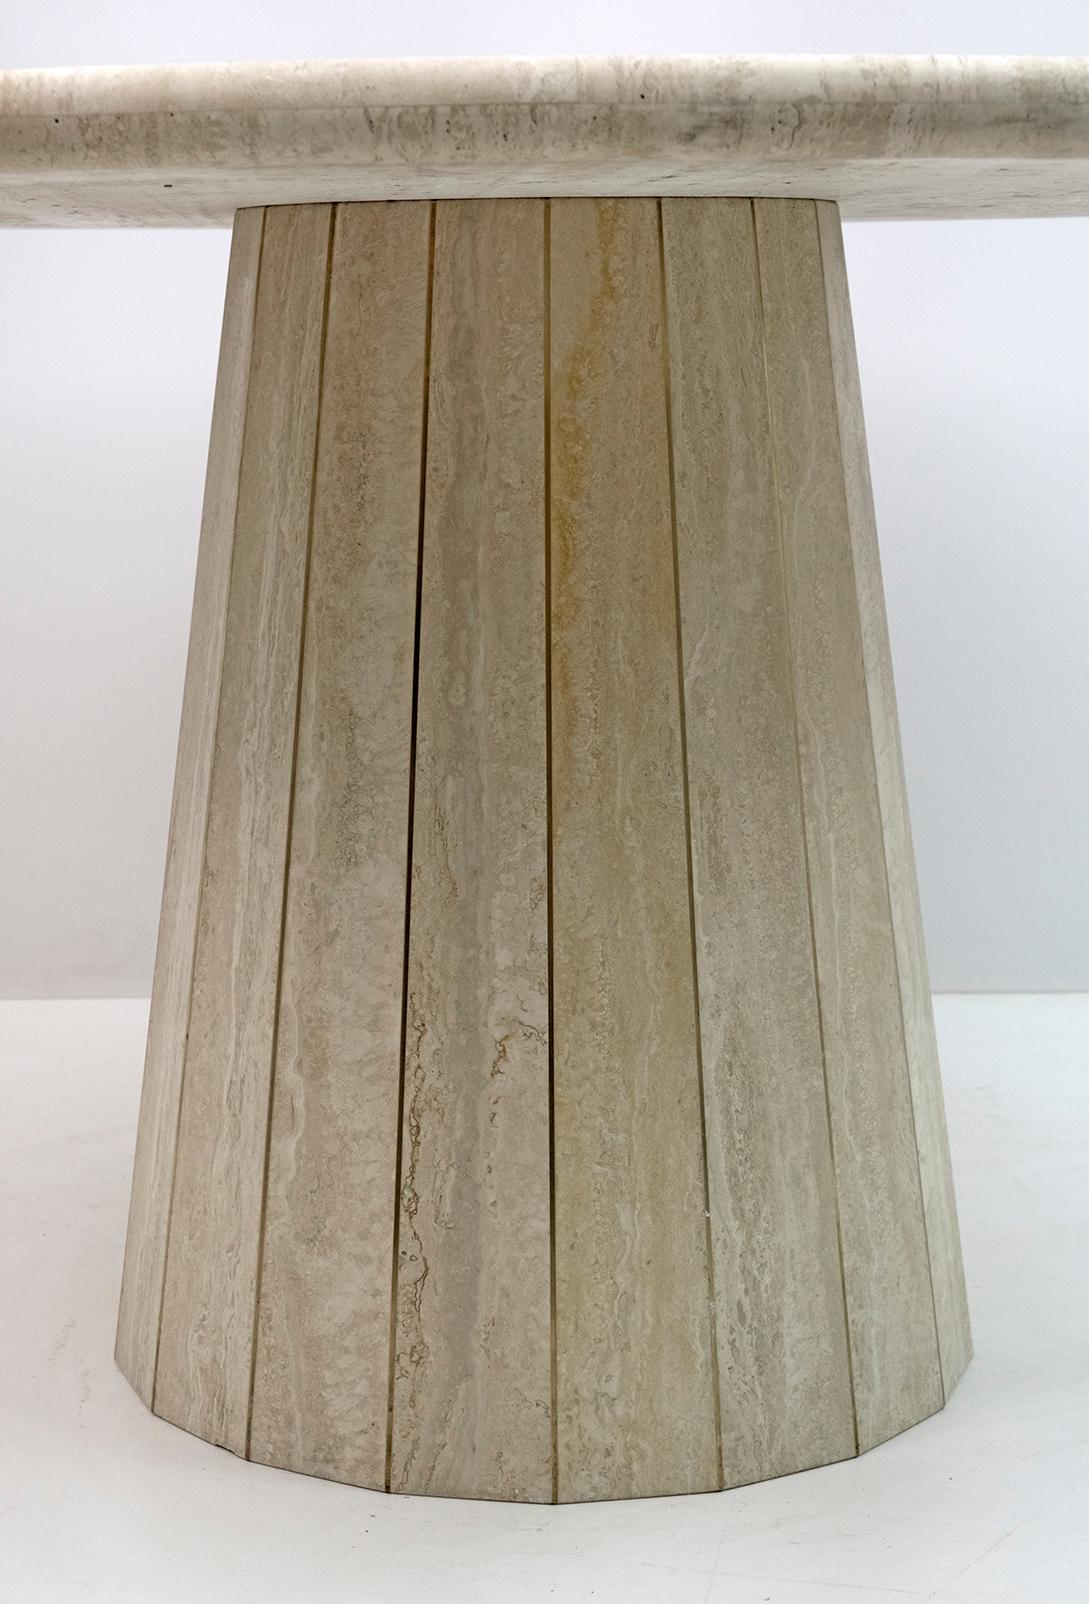 Late 20th Century Willy Rizzo Mid-century Italian Travertine whit Brass Inlays Round Dining Table